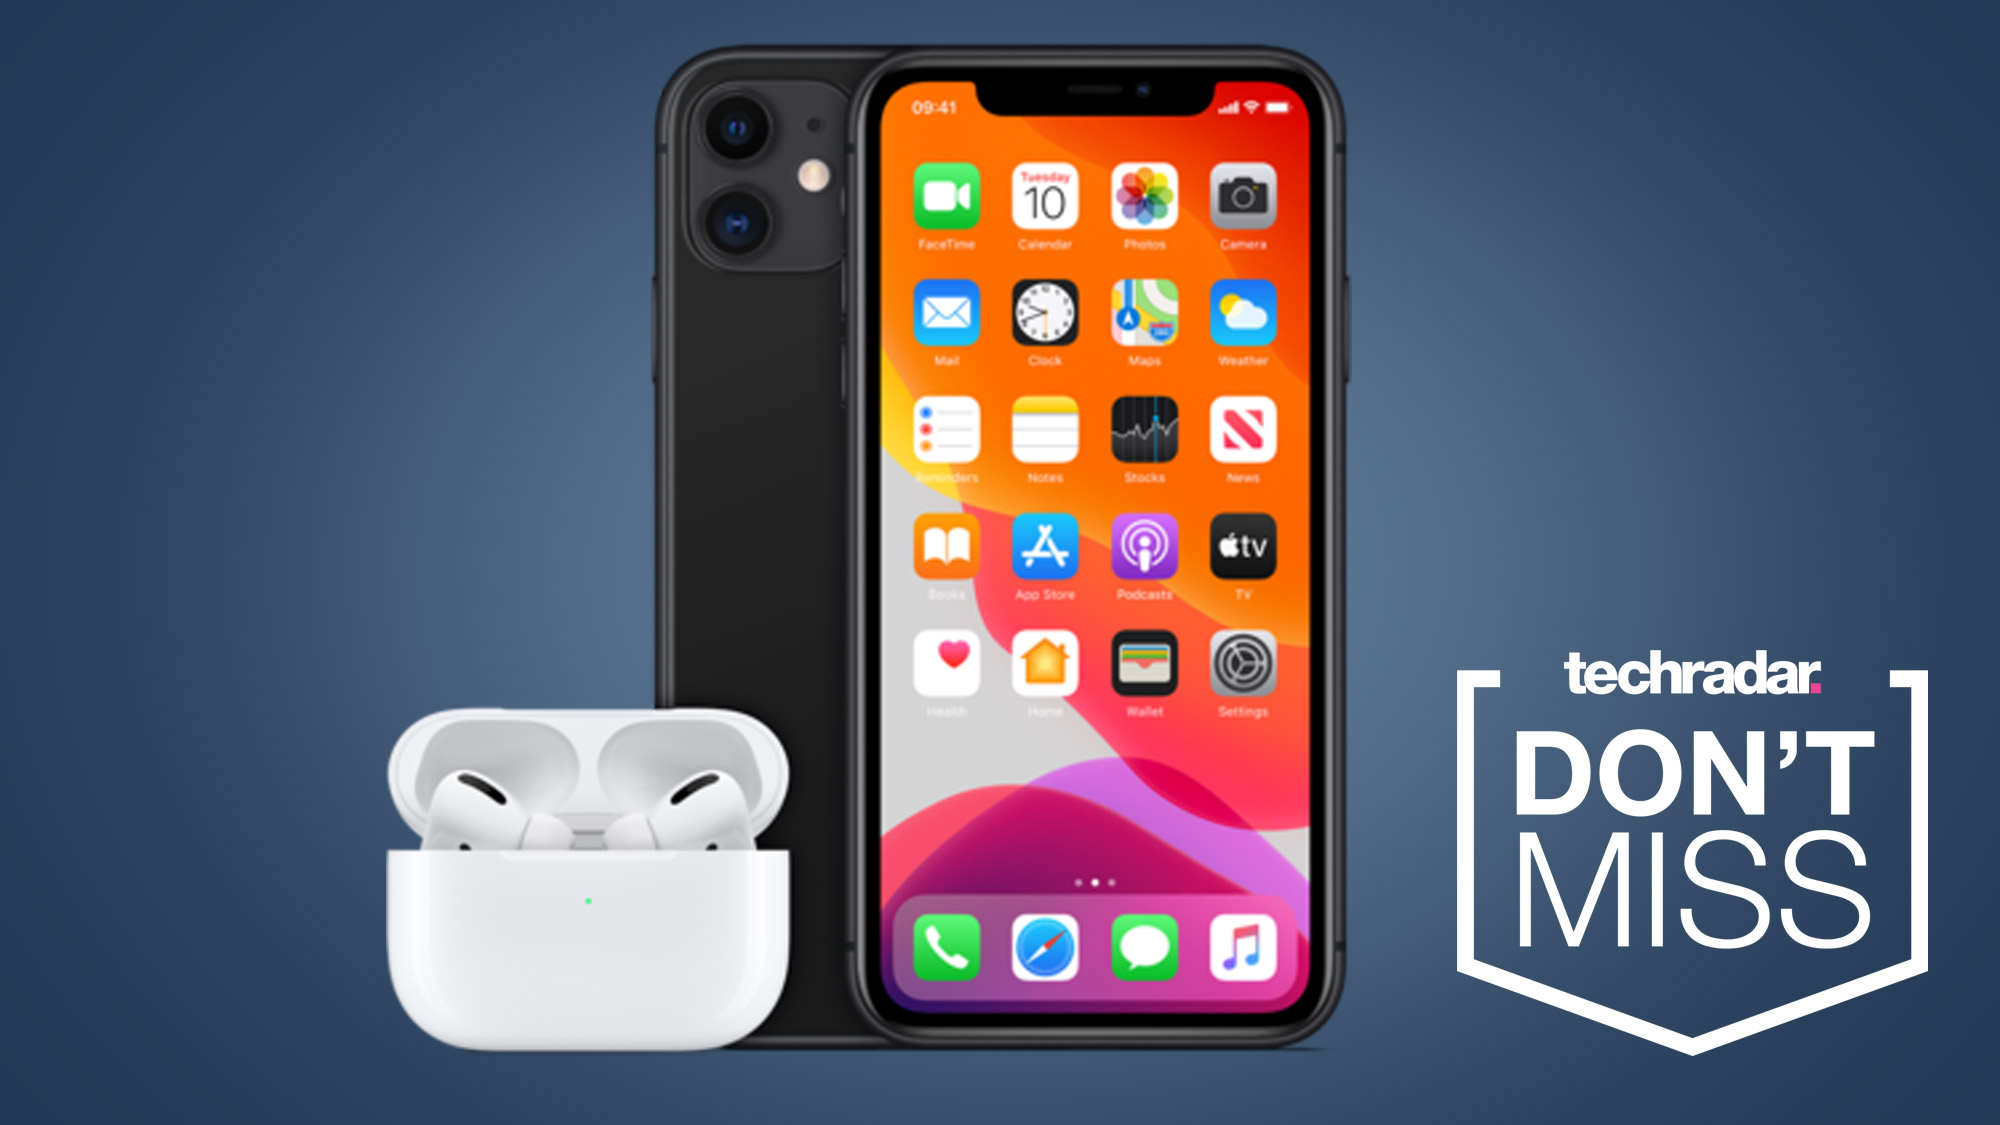 Tesco Mobile is throwing in free AirPods with iPhone deals in its